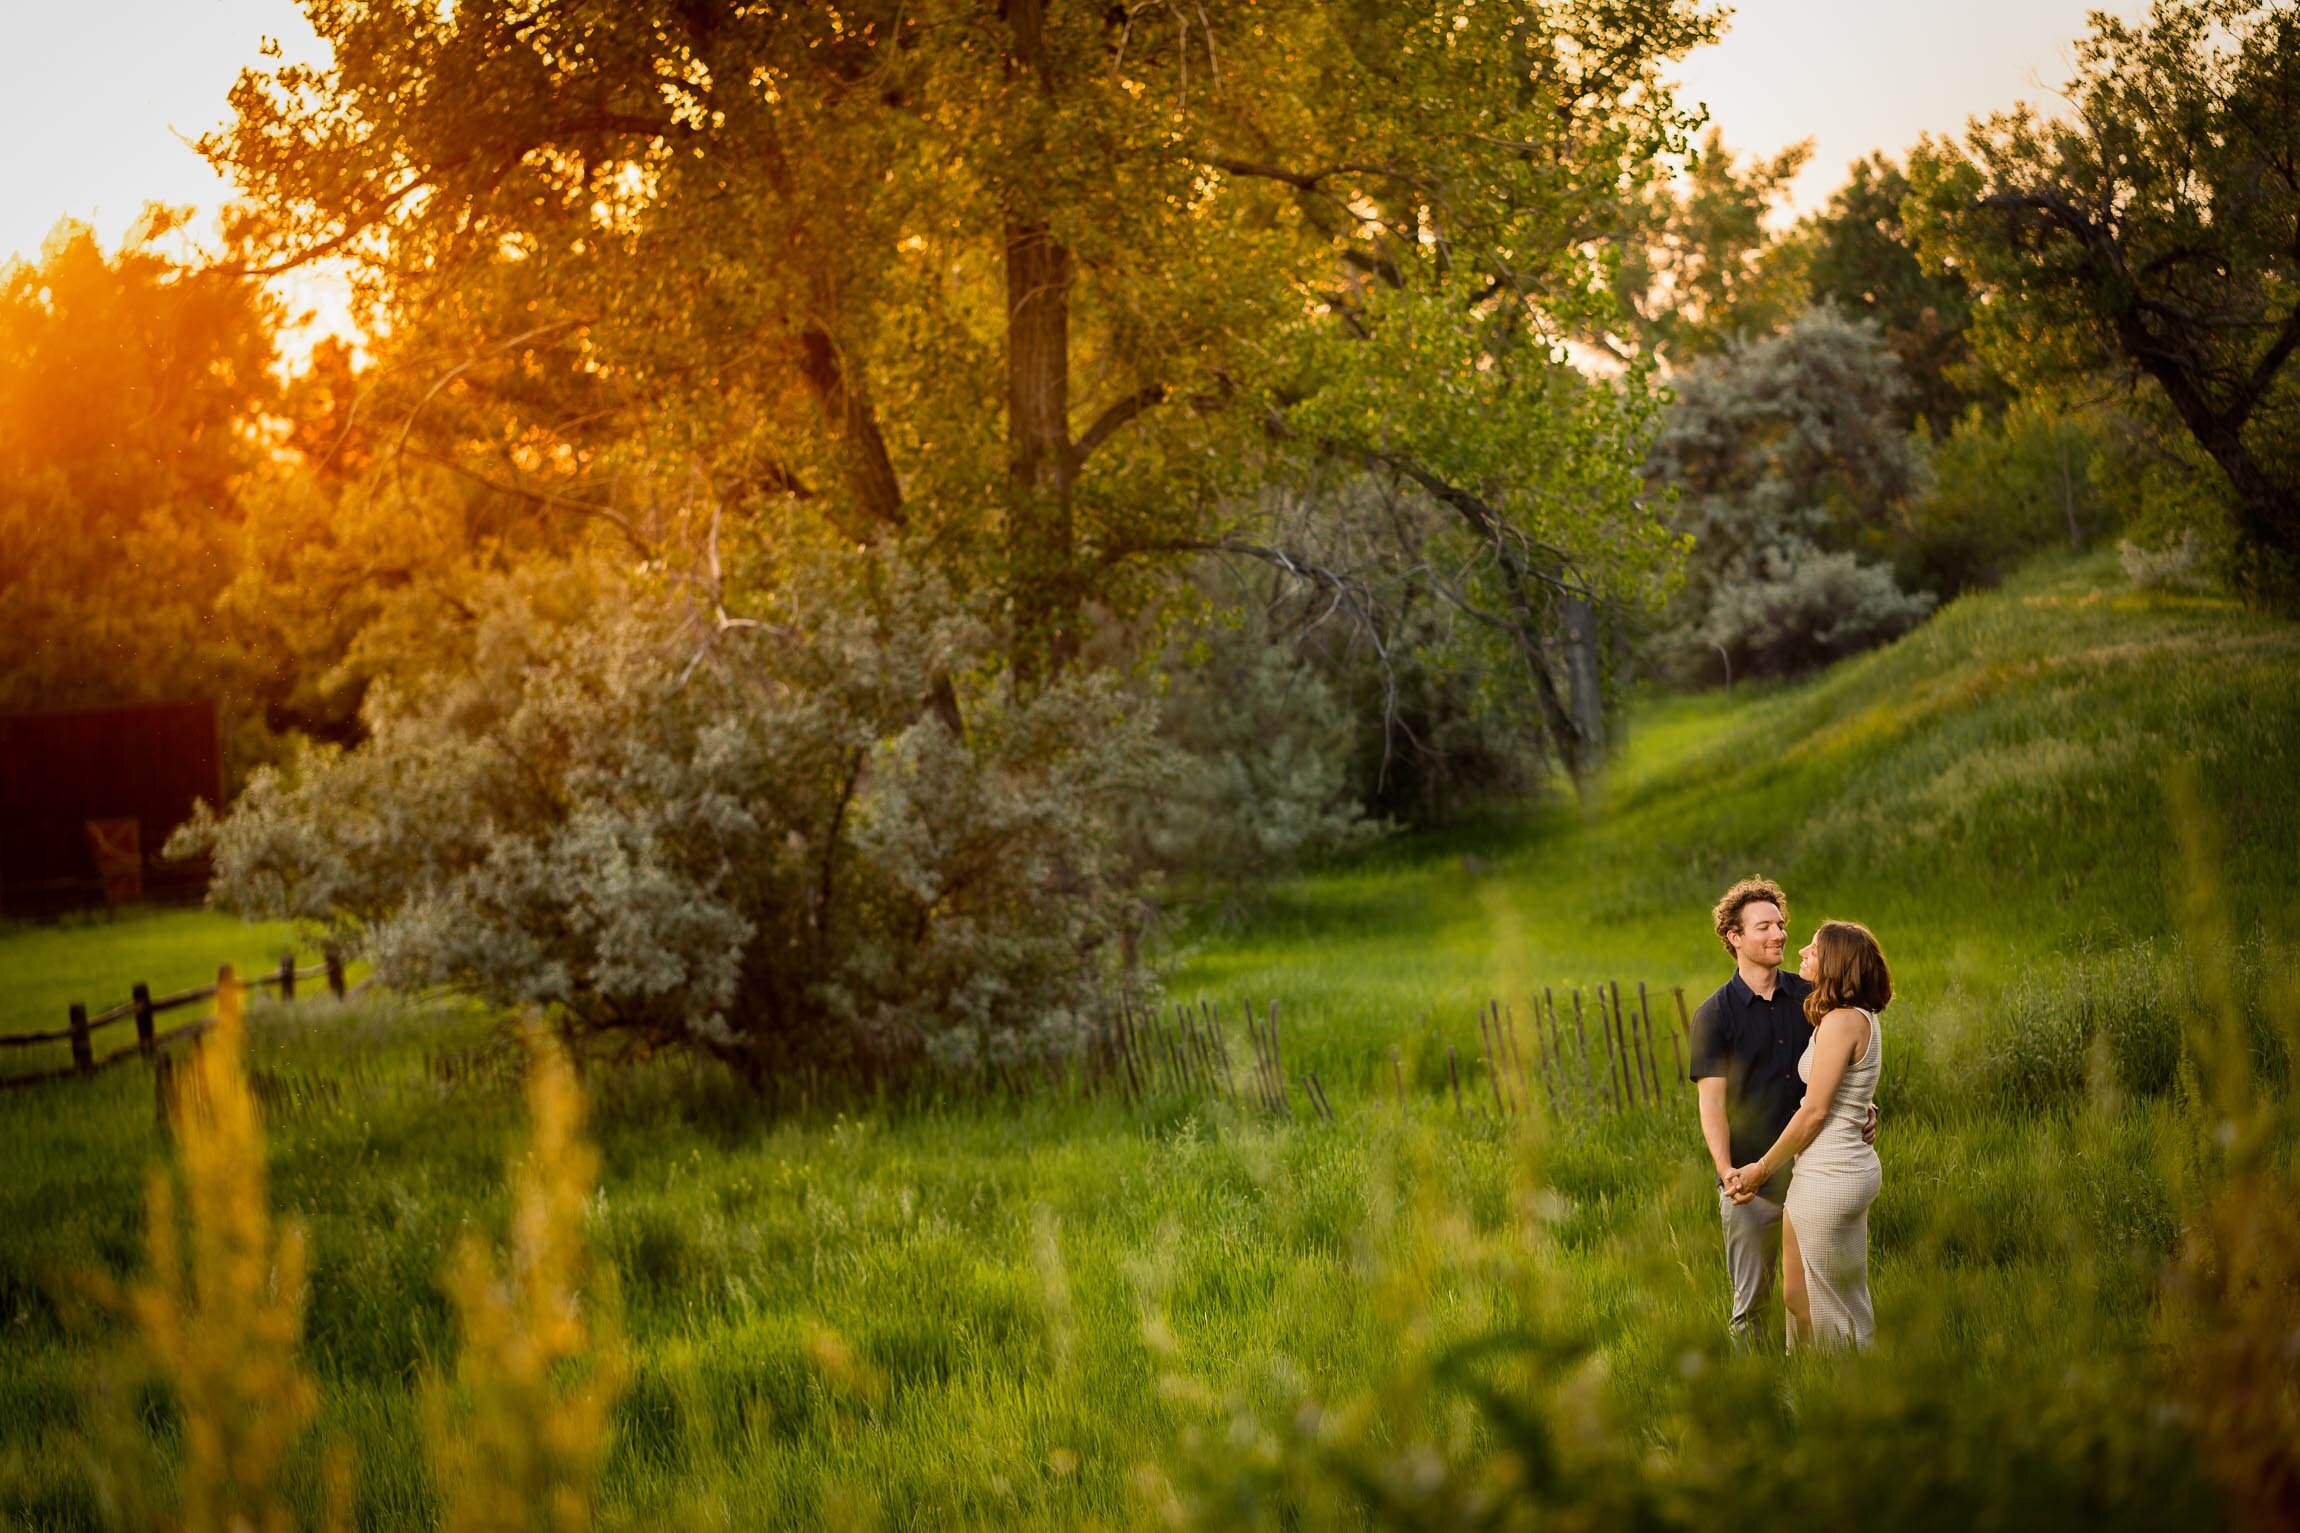 Engaged couple embraces in a field  during golden hour, Engagement Session, Engagement Photos, Engagement Photos Inspiration, Engagement Photography, Engagement Photographer, Winter Engagement Photos, Mountain Engagement Photos, Denver engagement session, Denver engagement photos, Denver engagement photography, Denver engagement photographer, Denver engagement inspiration, Colorado engagement session, Colorado engagement photos, Colorado engagement photography, Colorado engagement photographer, Colorado engagement inspiration